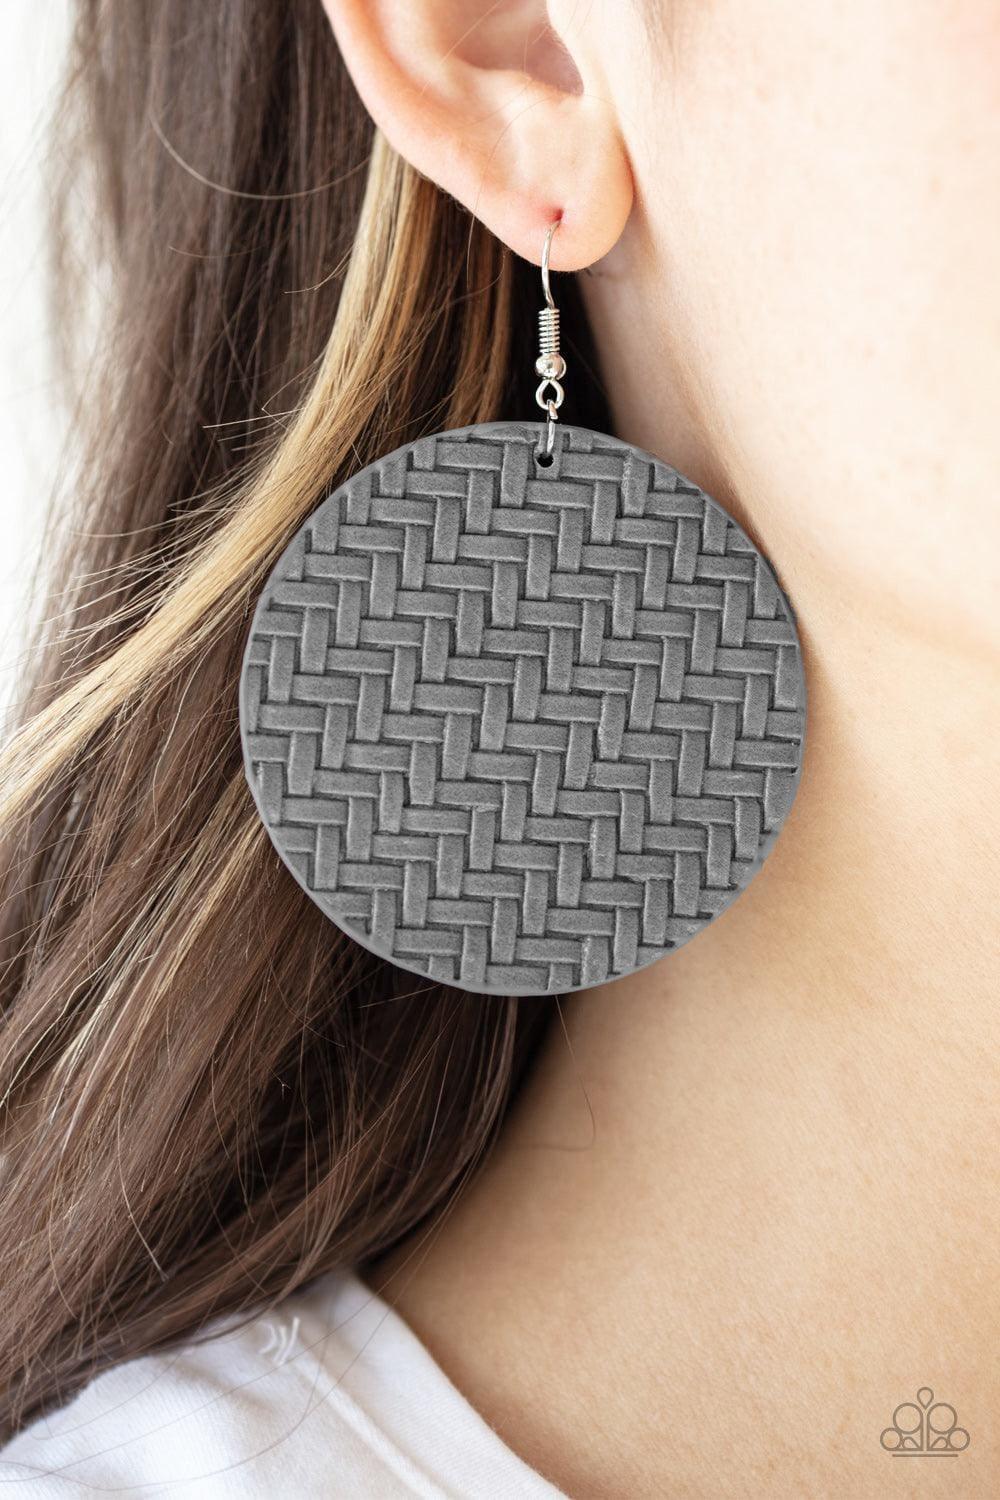 Paparazzi Accessories - Plaited Plains - Silver/gray Earrings - Bling by JessieK